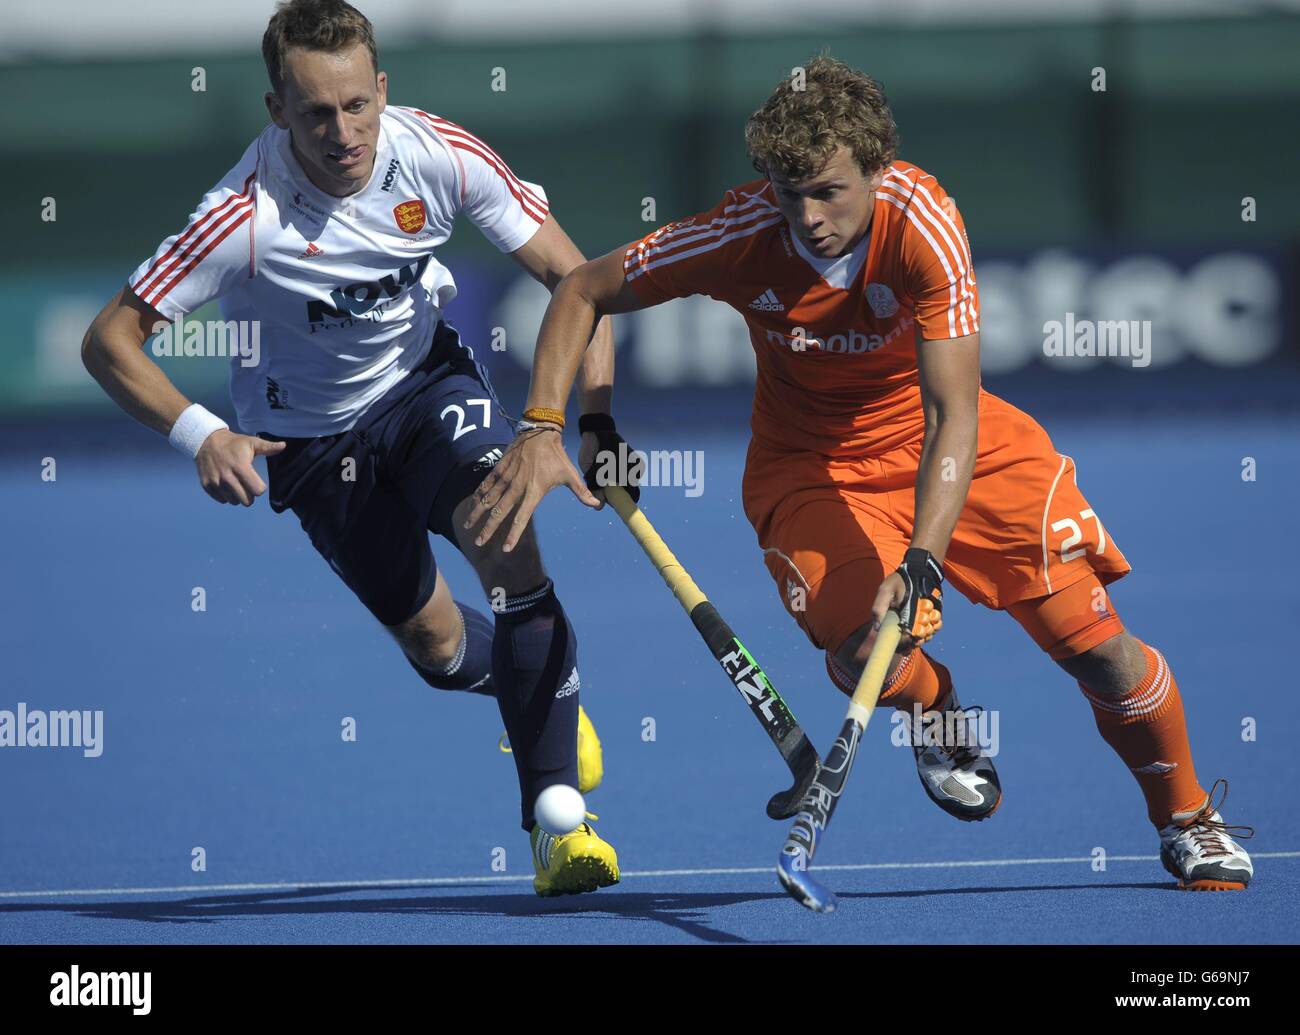 England's Dan Fox challenges with Netherlands' Constantijn Jonker during the second game of the NOW:Pensions Nations Cup at Wakefield Hockey Club, Wakefield. Stock Photo